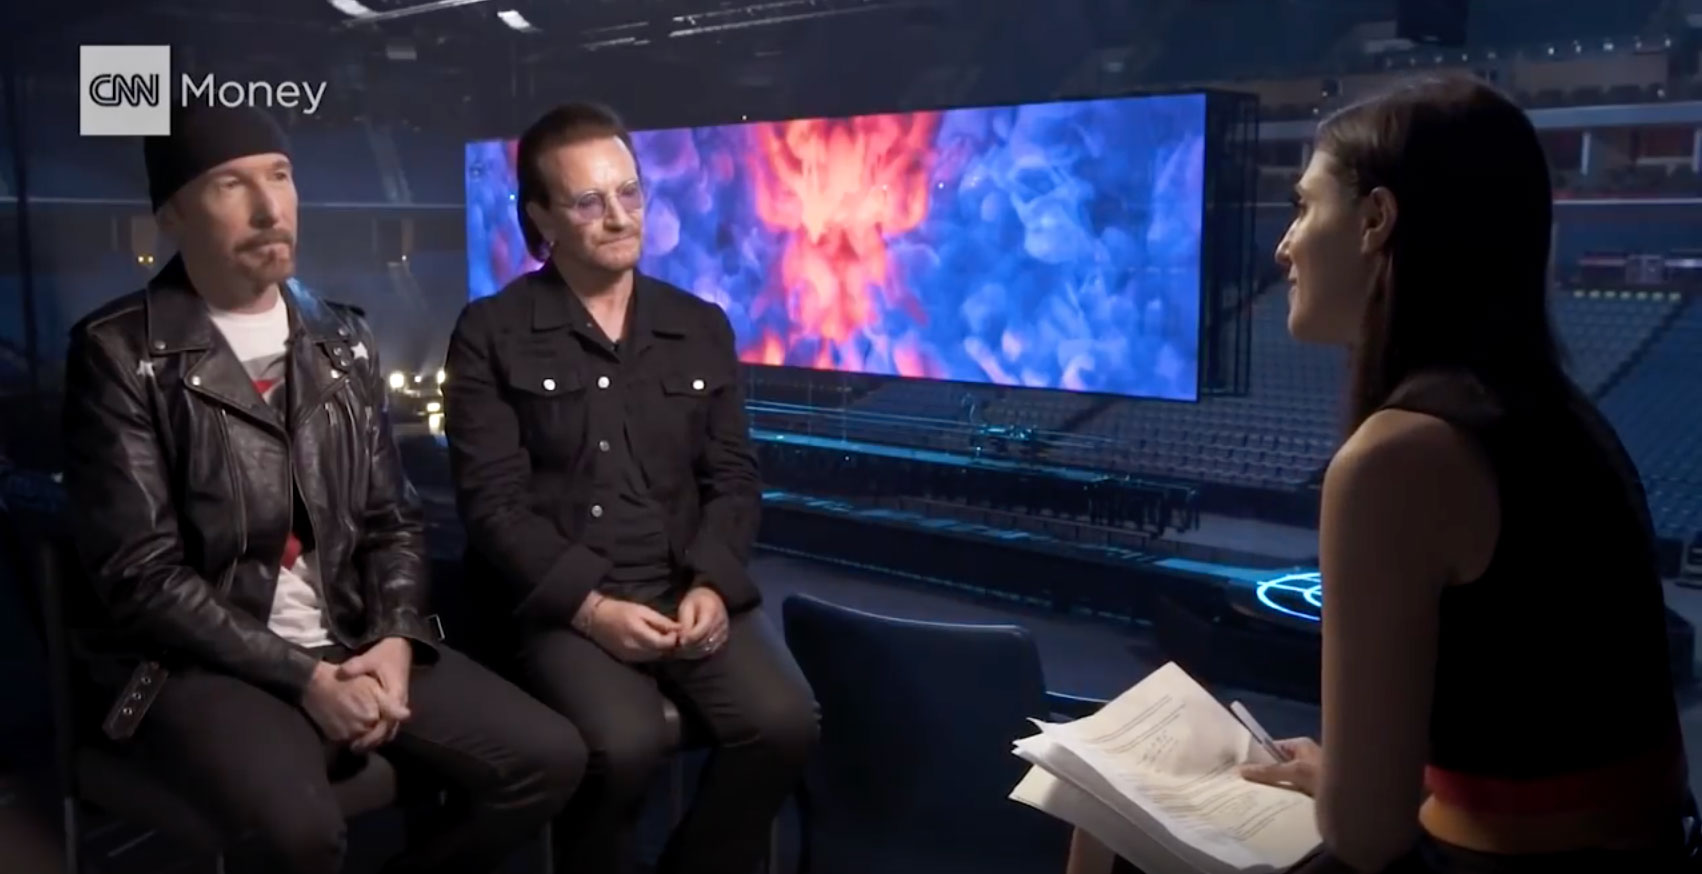 Bono and The Edge: Why U2 is embracing AR tech on tour